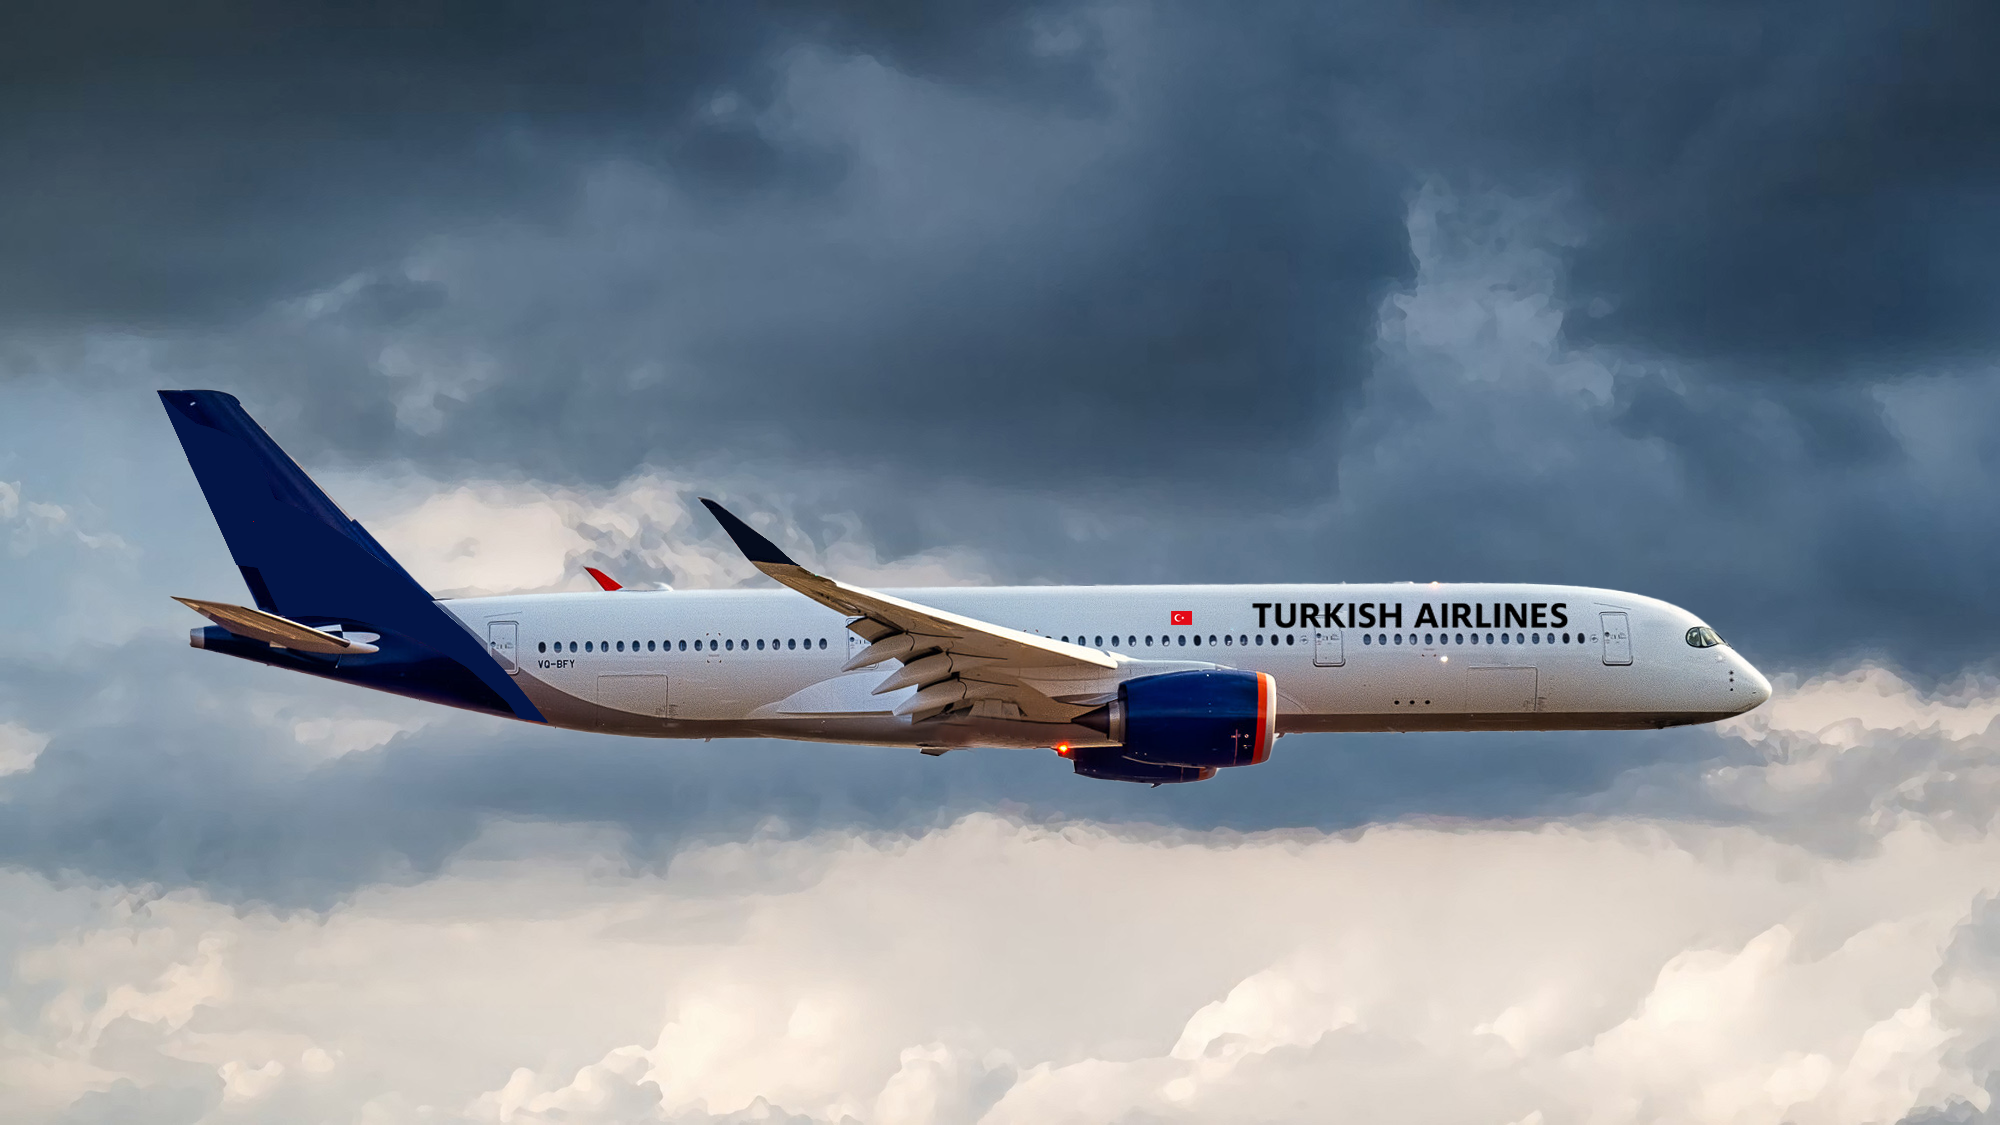 An Ex-Aeroflot Airbus A350-900, now Turkish Airlines, flying in the clouds.